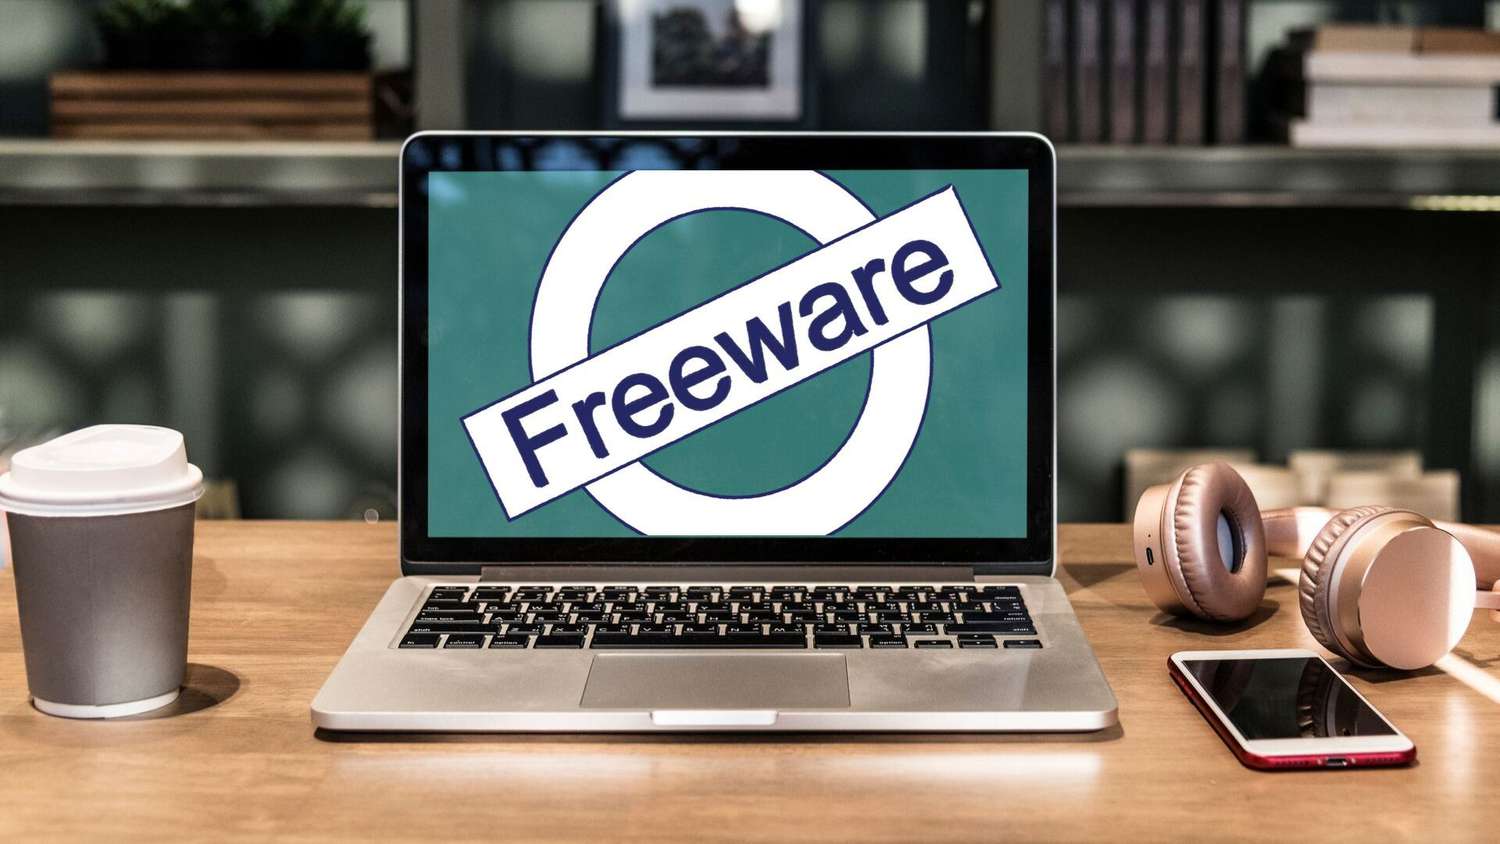 What Is Freeware?